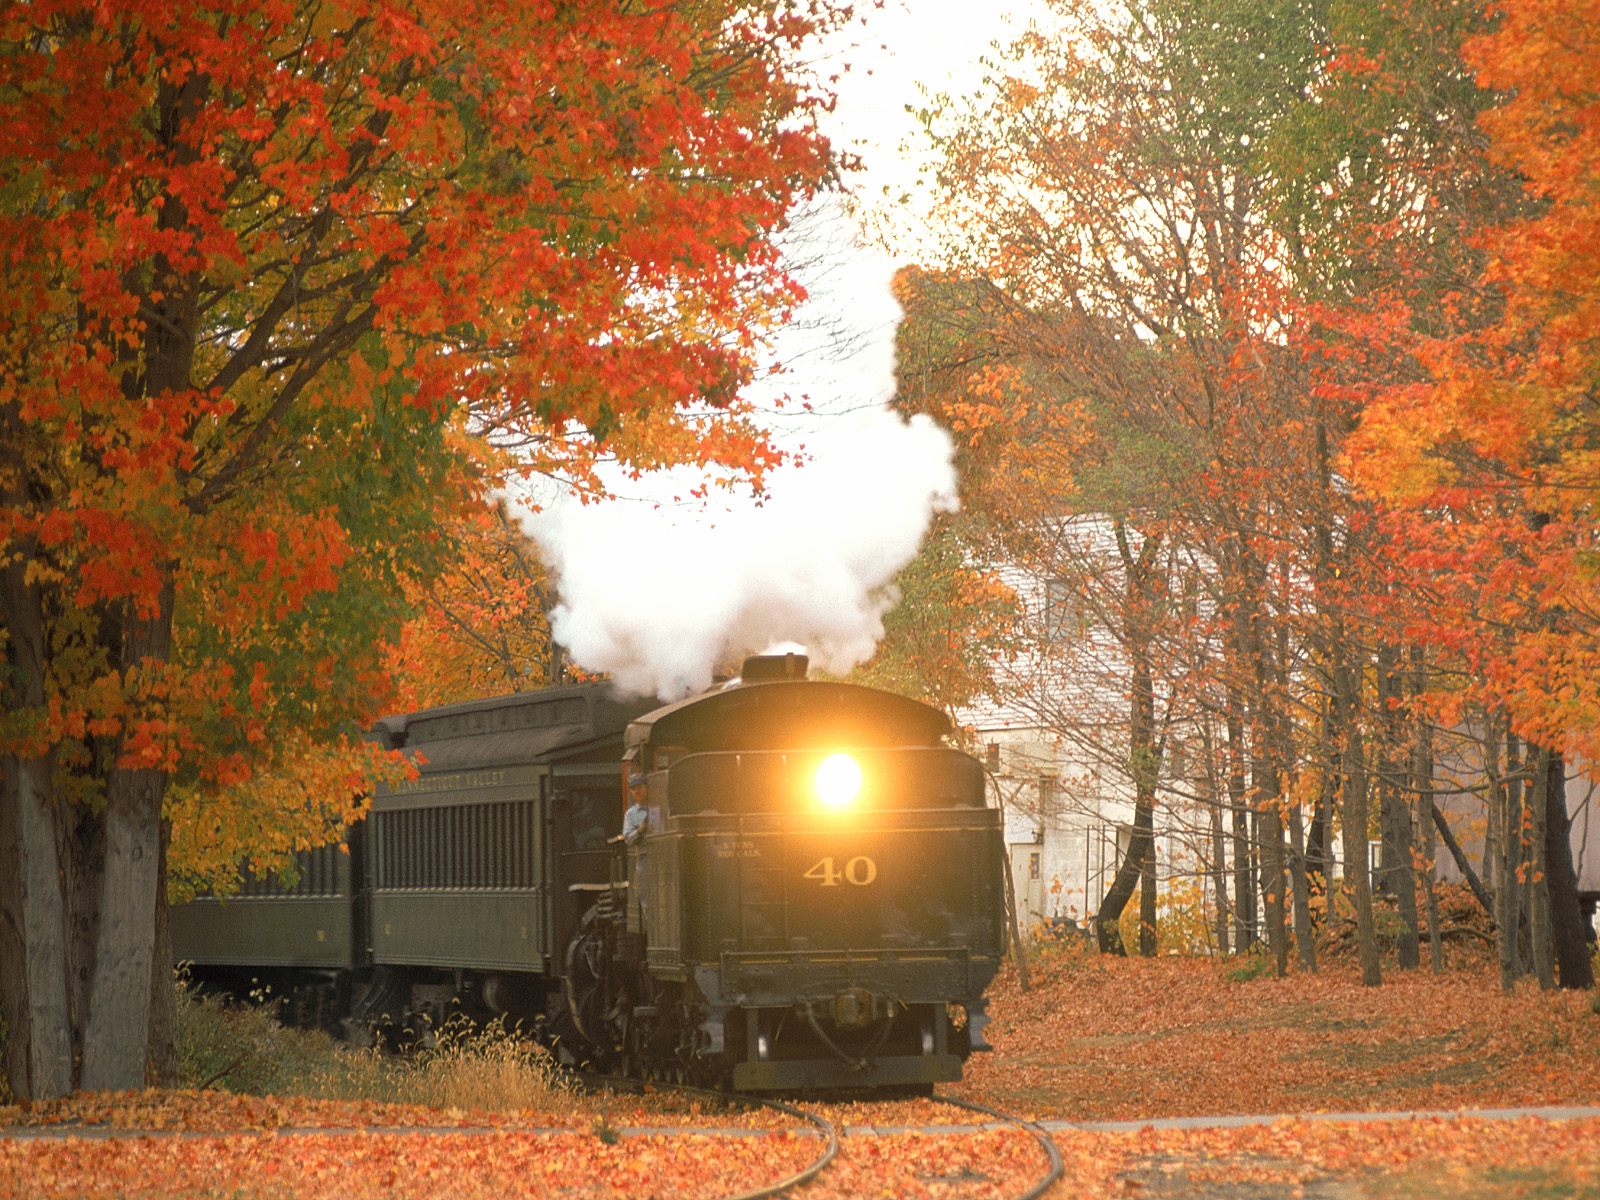 Ing The Train Wallpaper Named Essex Steam Connecticut